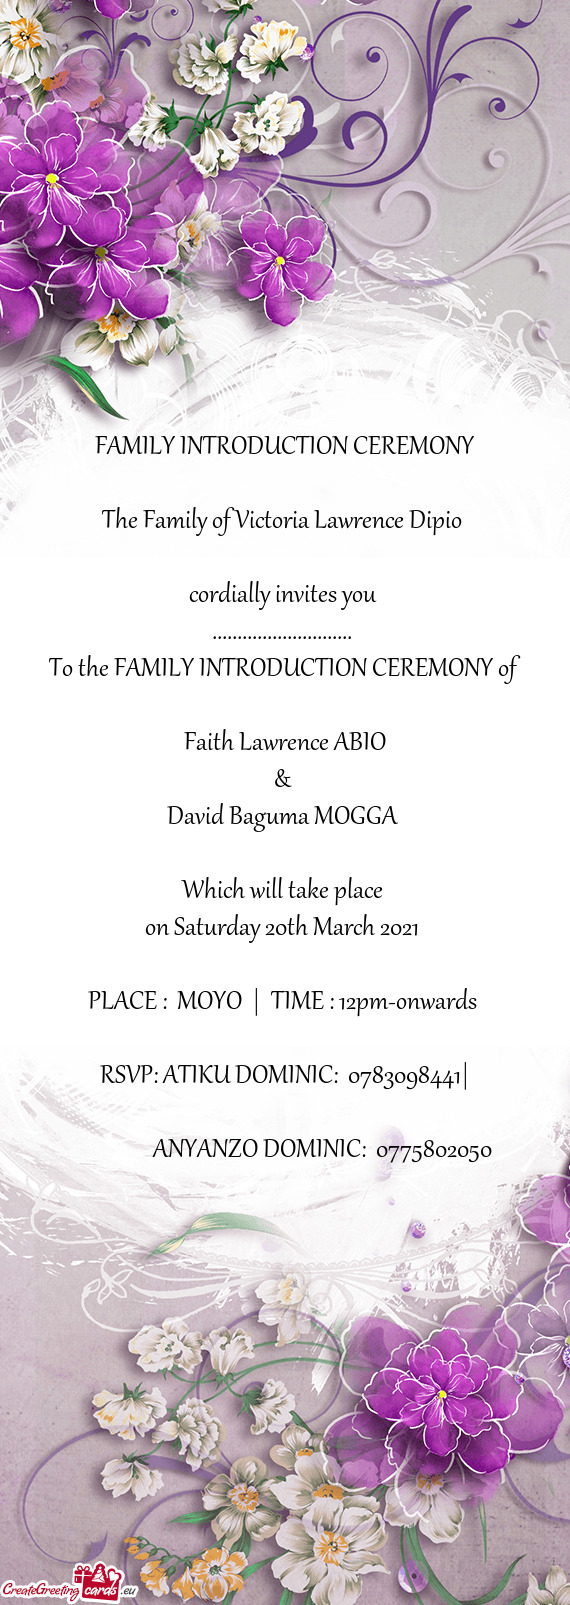 The Family of Victoria Lawrence Dipio